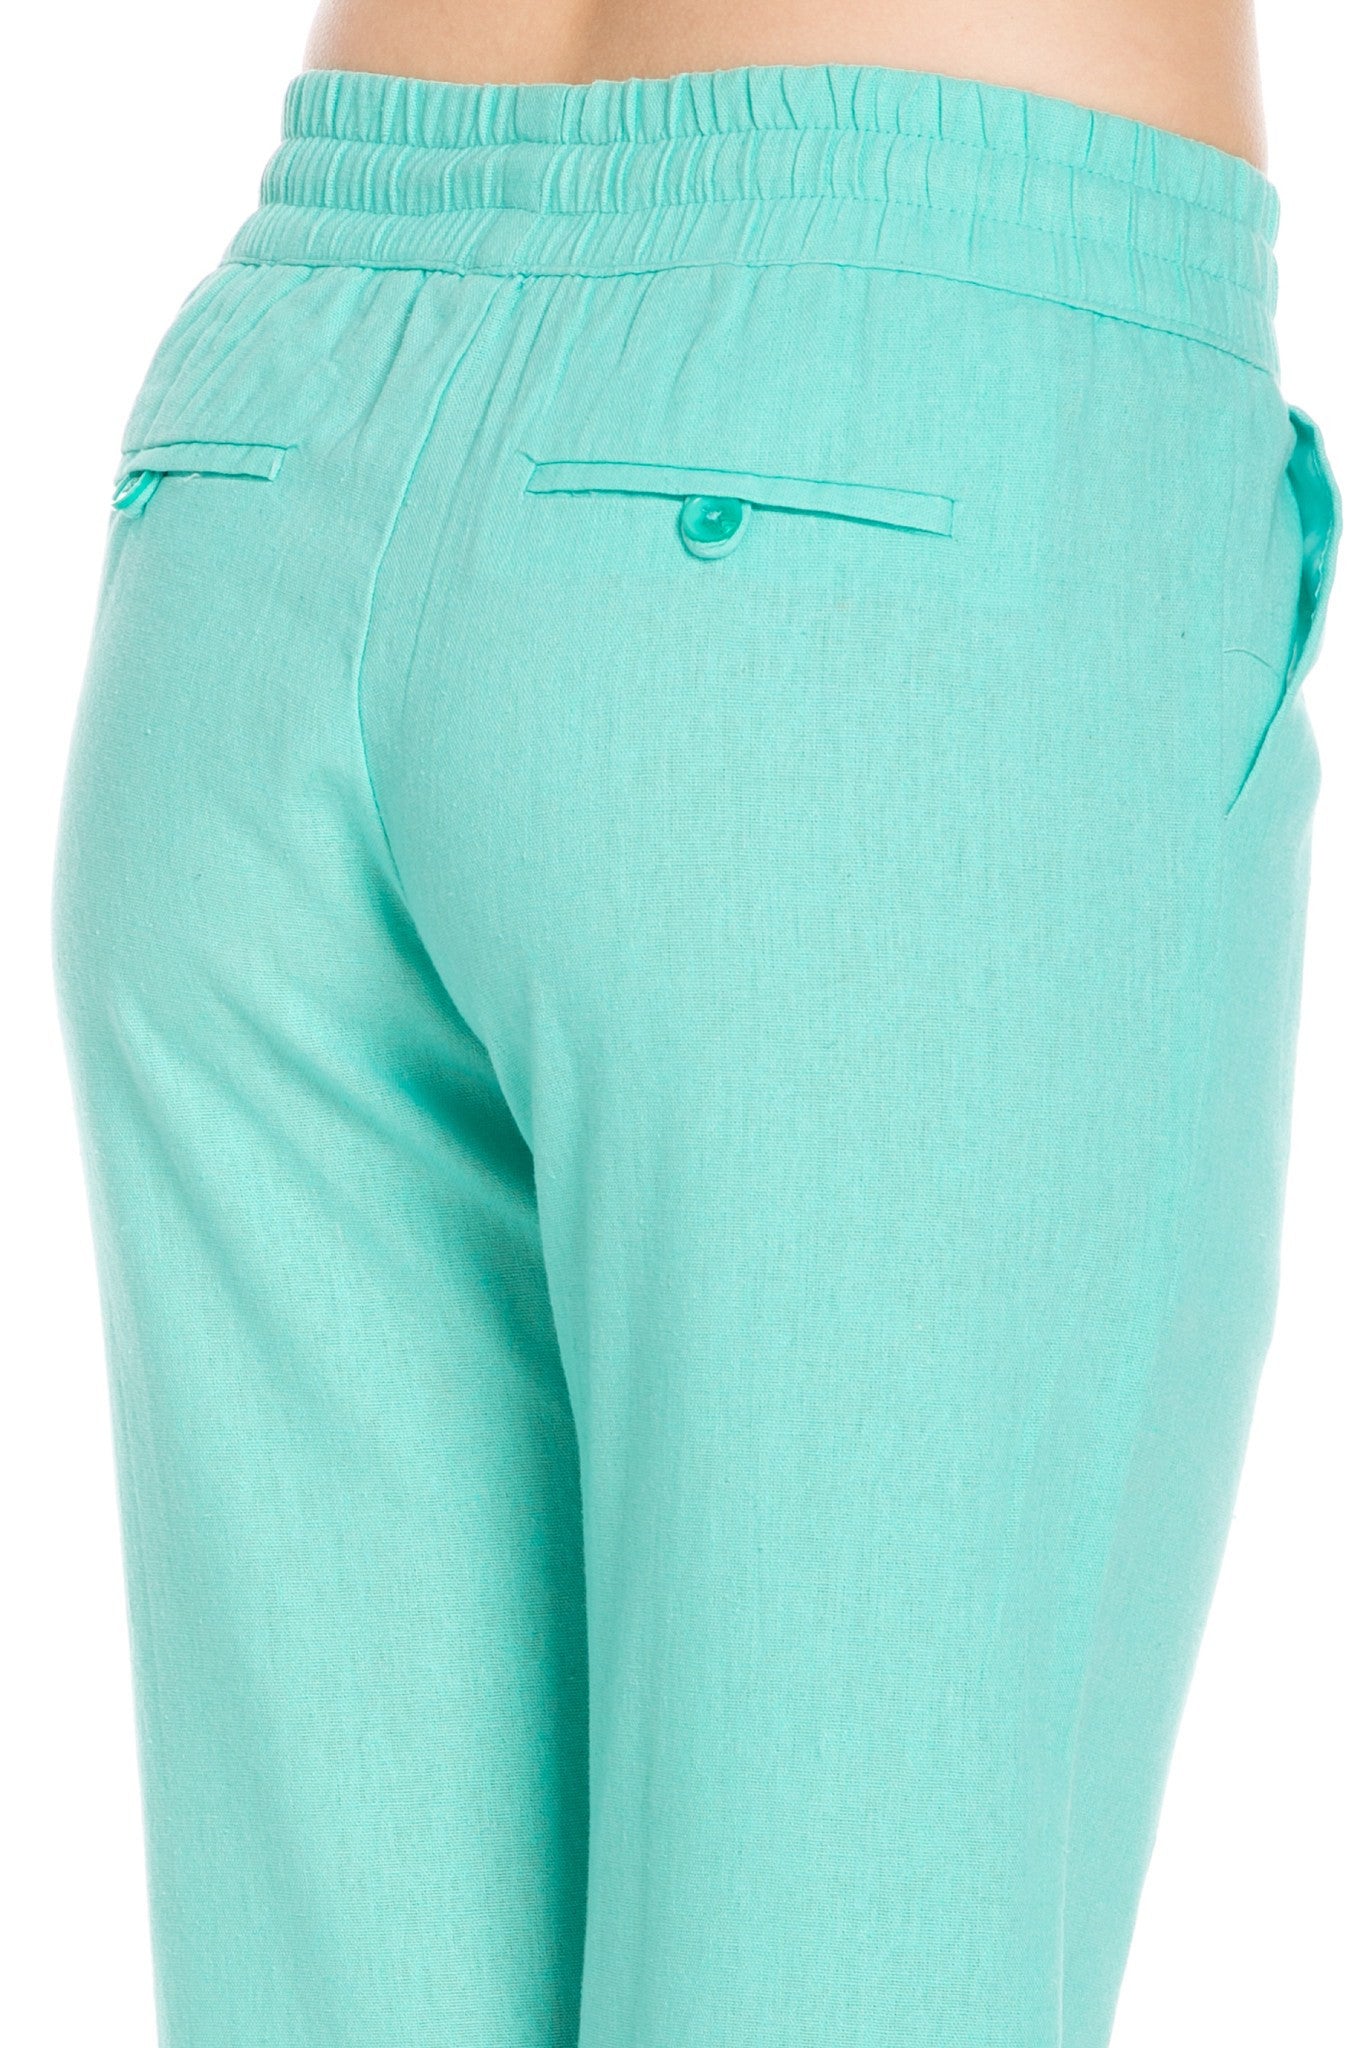 Comfy Drawstring Linen Pants Long with Band Waist (Mint) - Poplooks